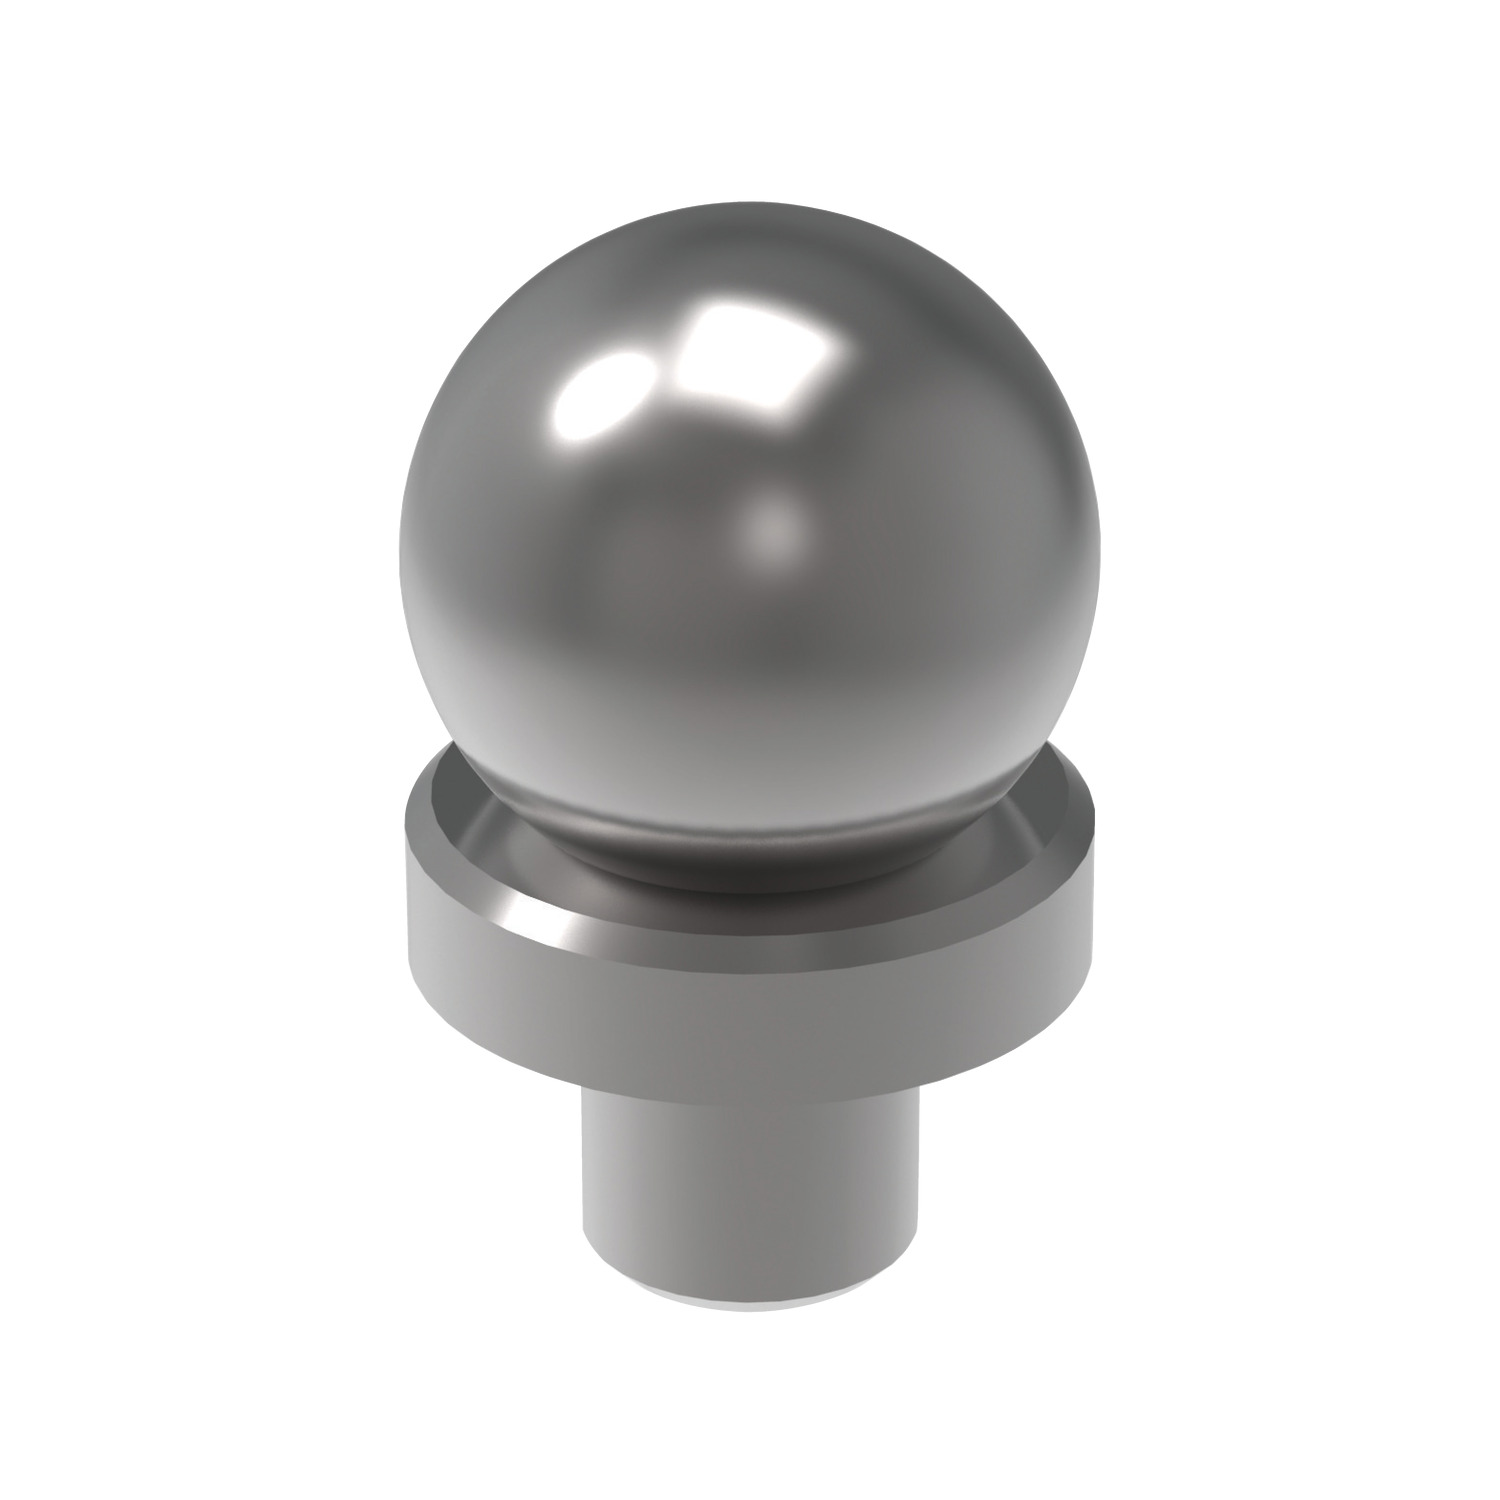 Product 20500, Inspection Balls - Imperial short shank - one piece construction / 